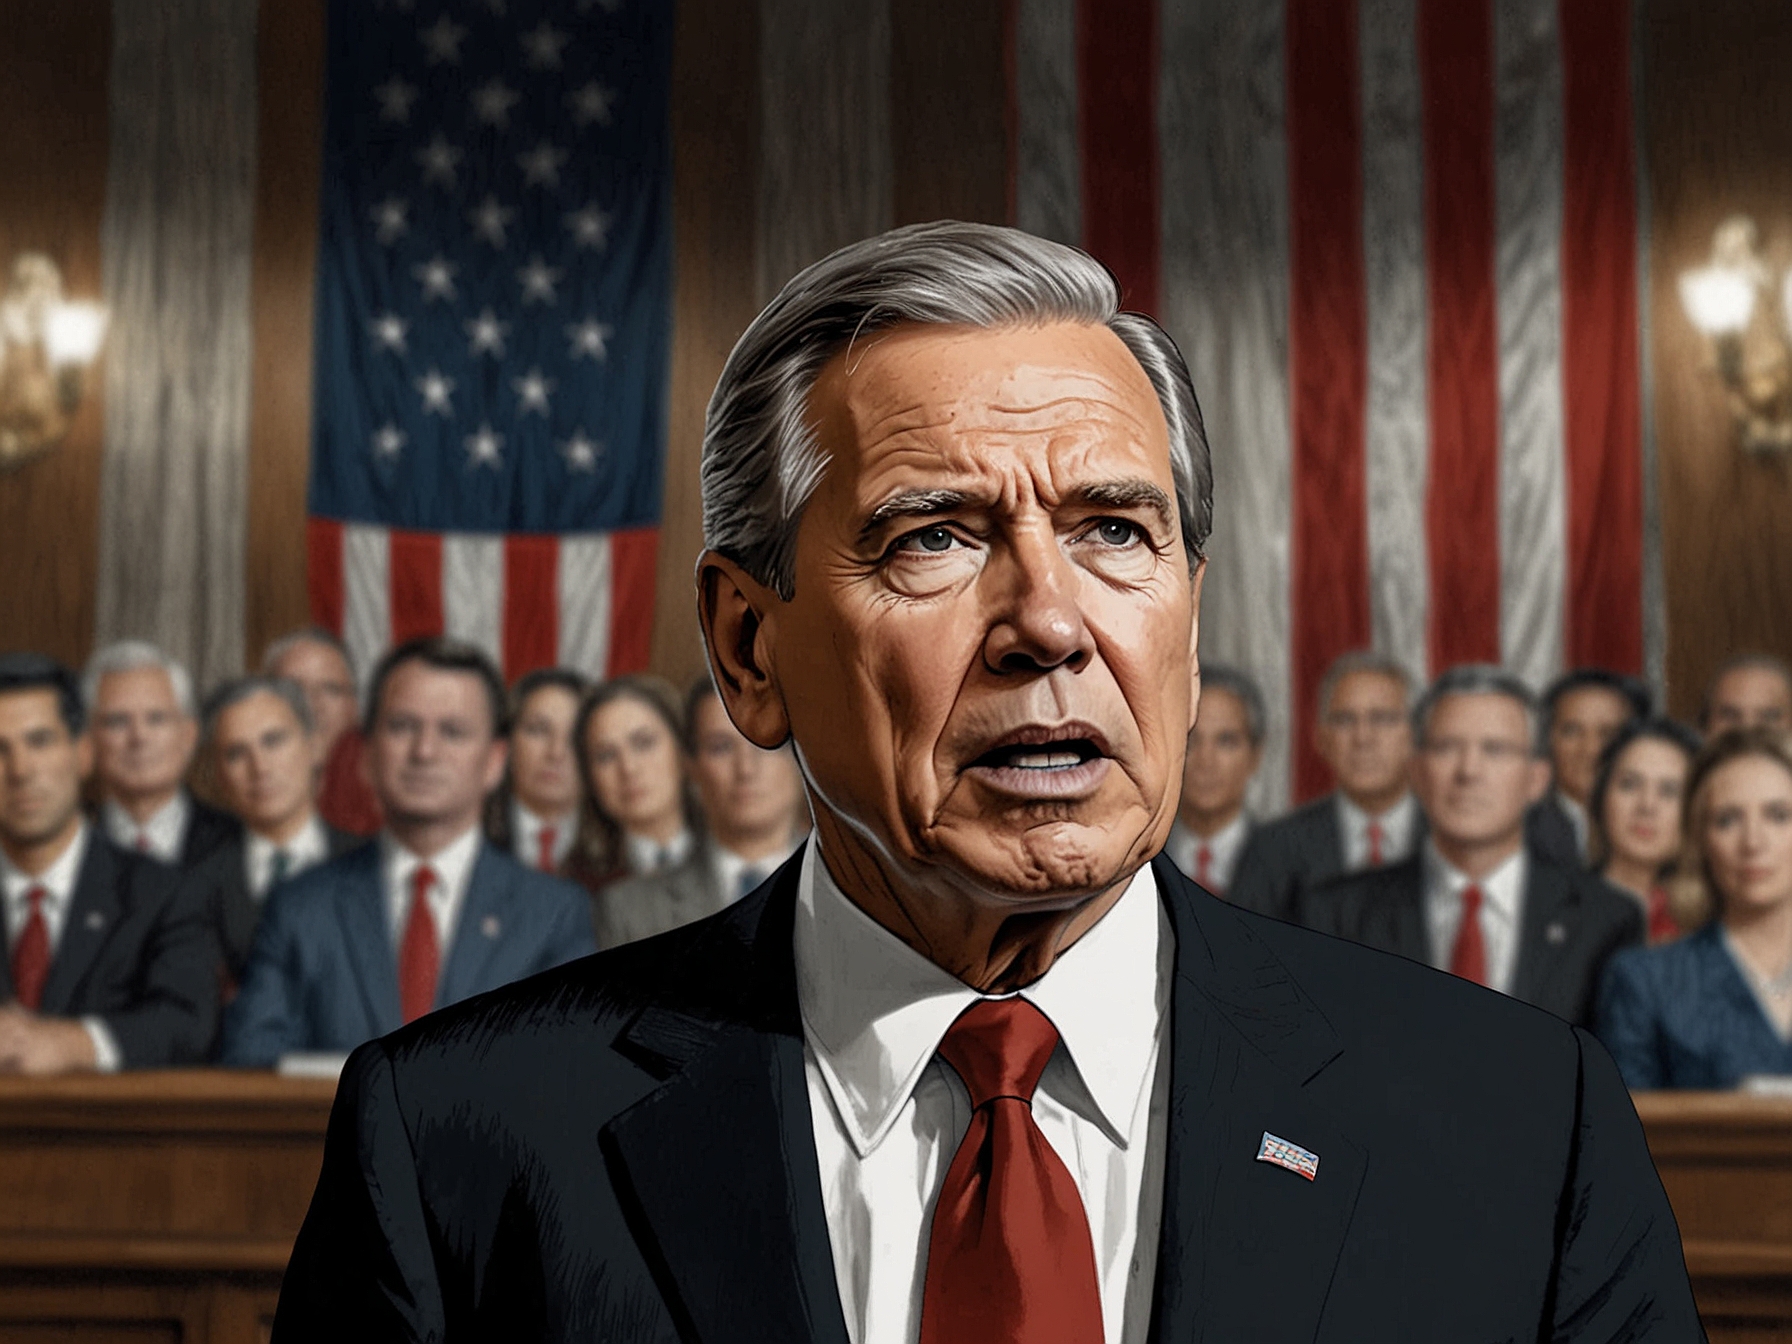 A depiction of the former president addressing supporters, symbolizing the political ramifications of the Supreme Court's ruling, which has energized his base and intensified national polarization.